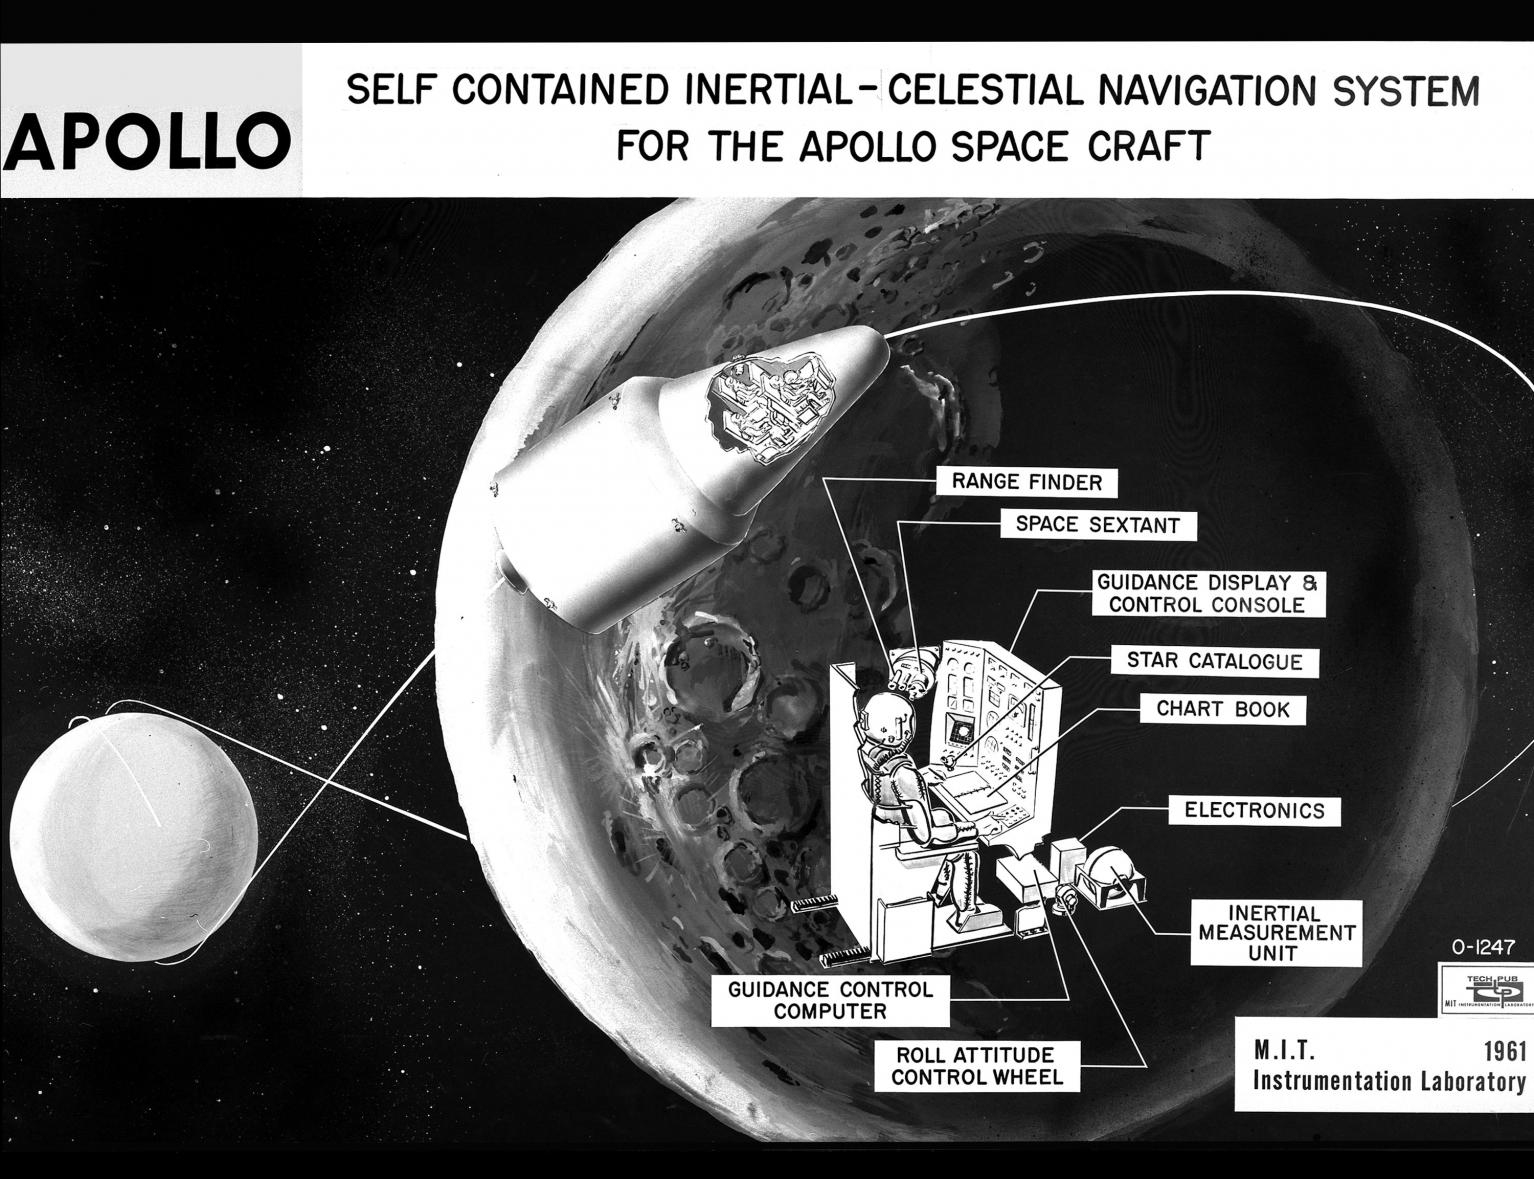 Apollo Self Contained Inertial-Celestial Navigation System